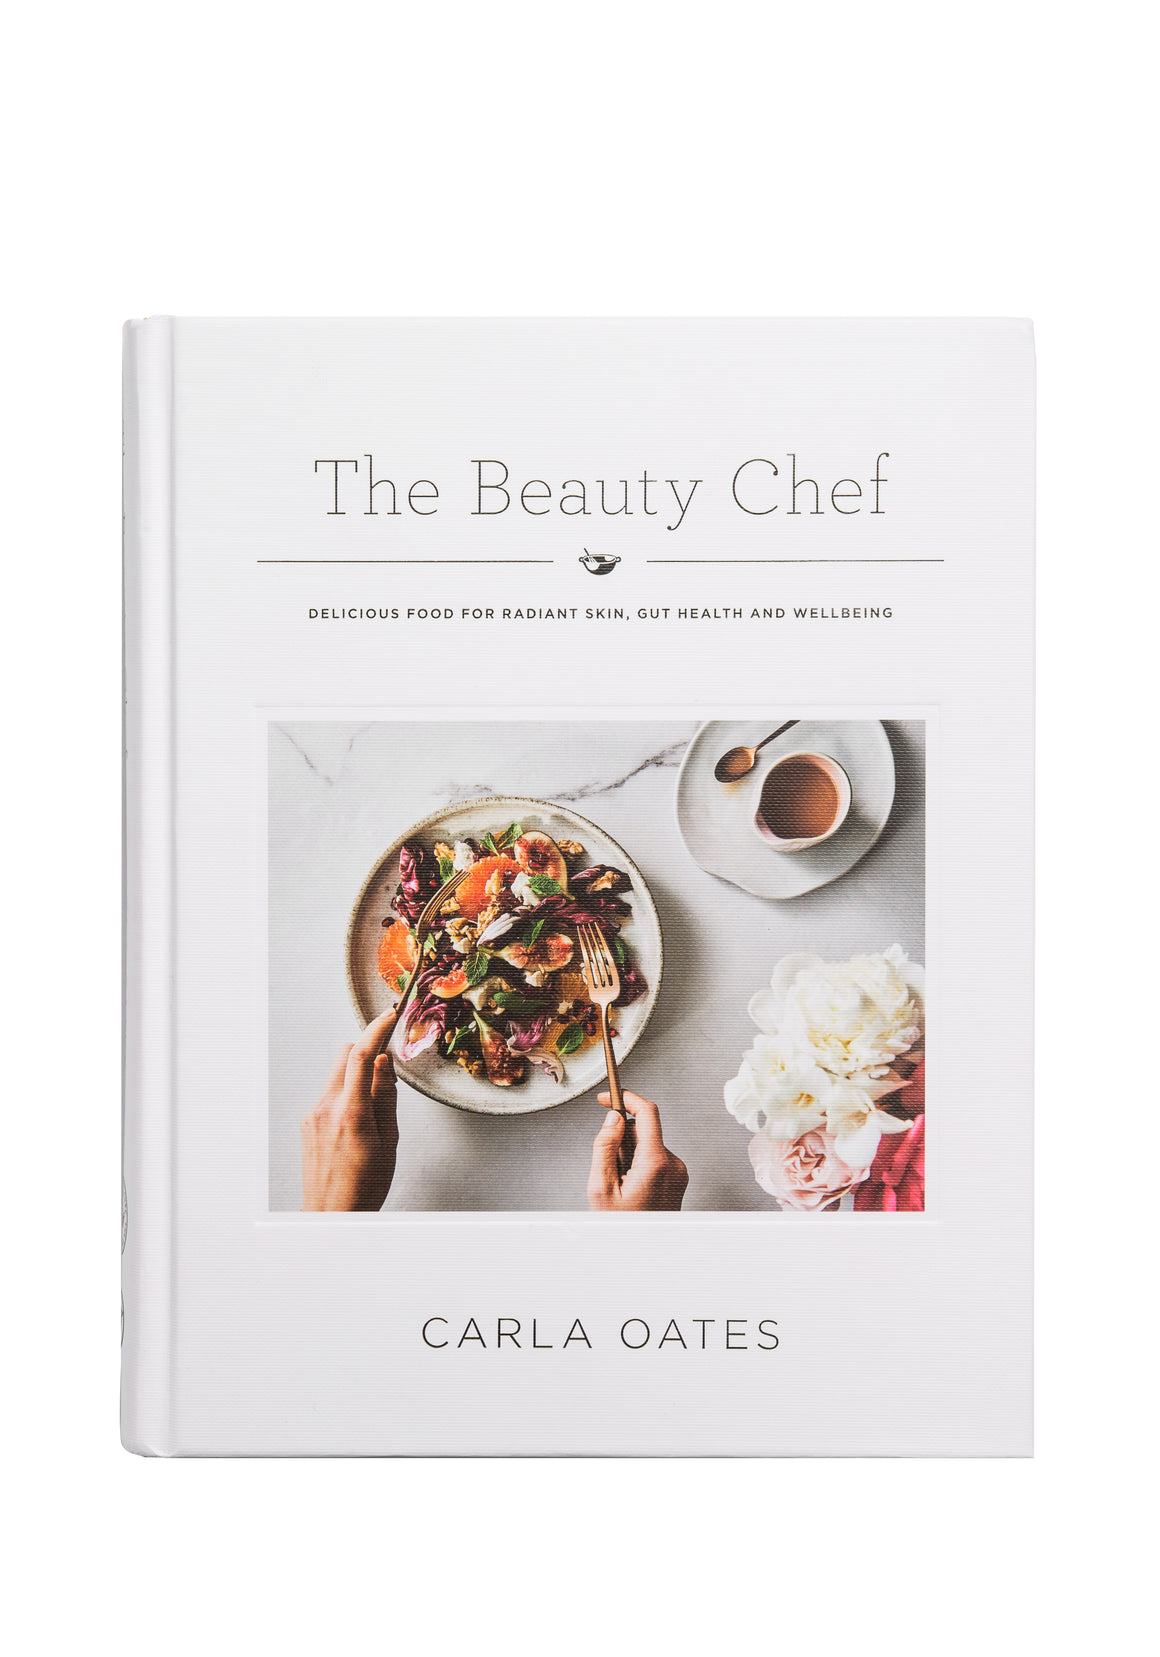 THE BEAUTY CHEF COOKBOOK